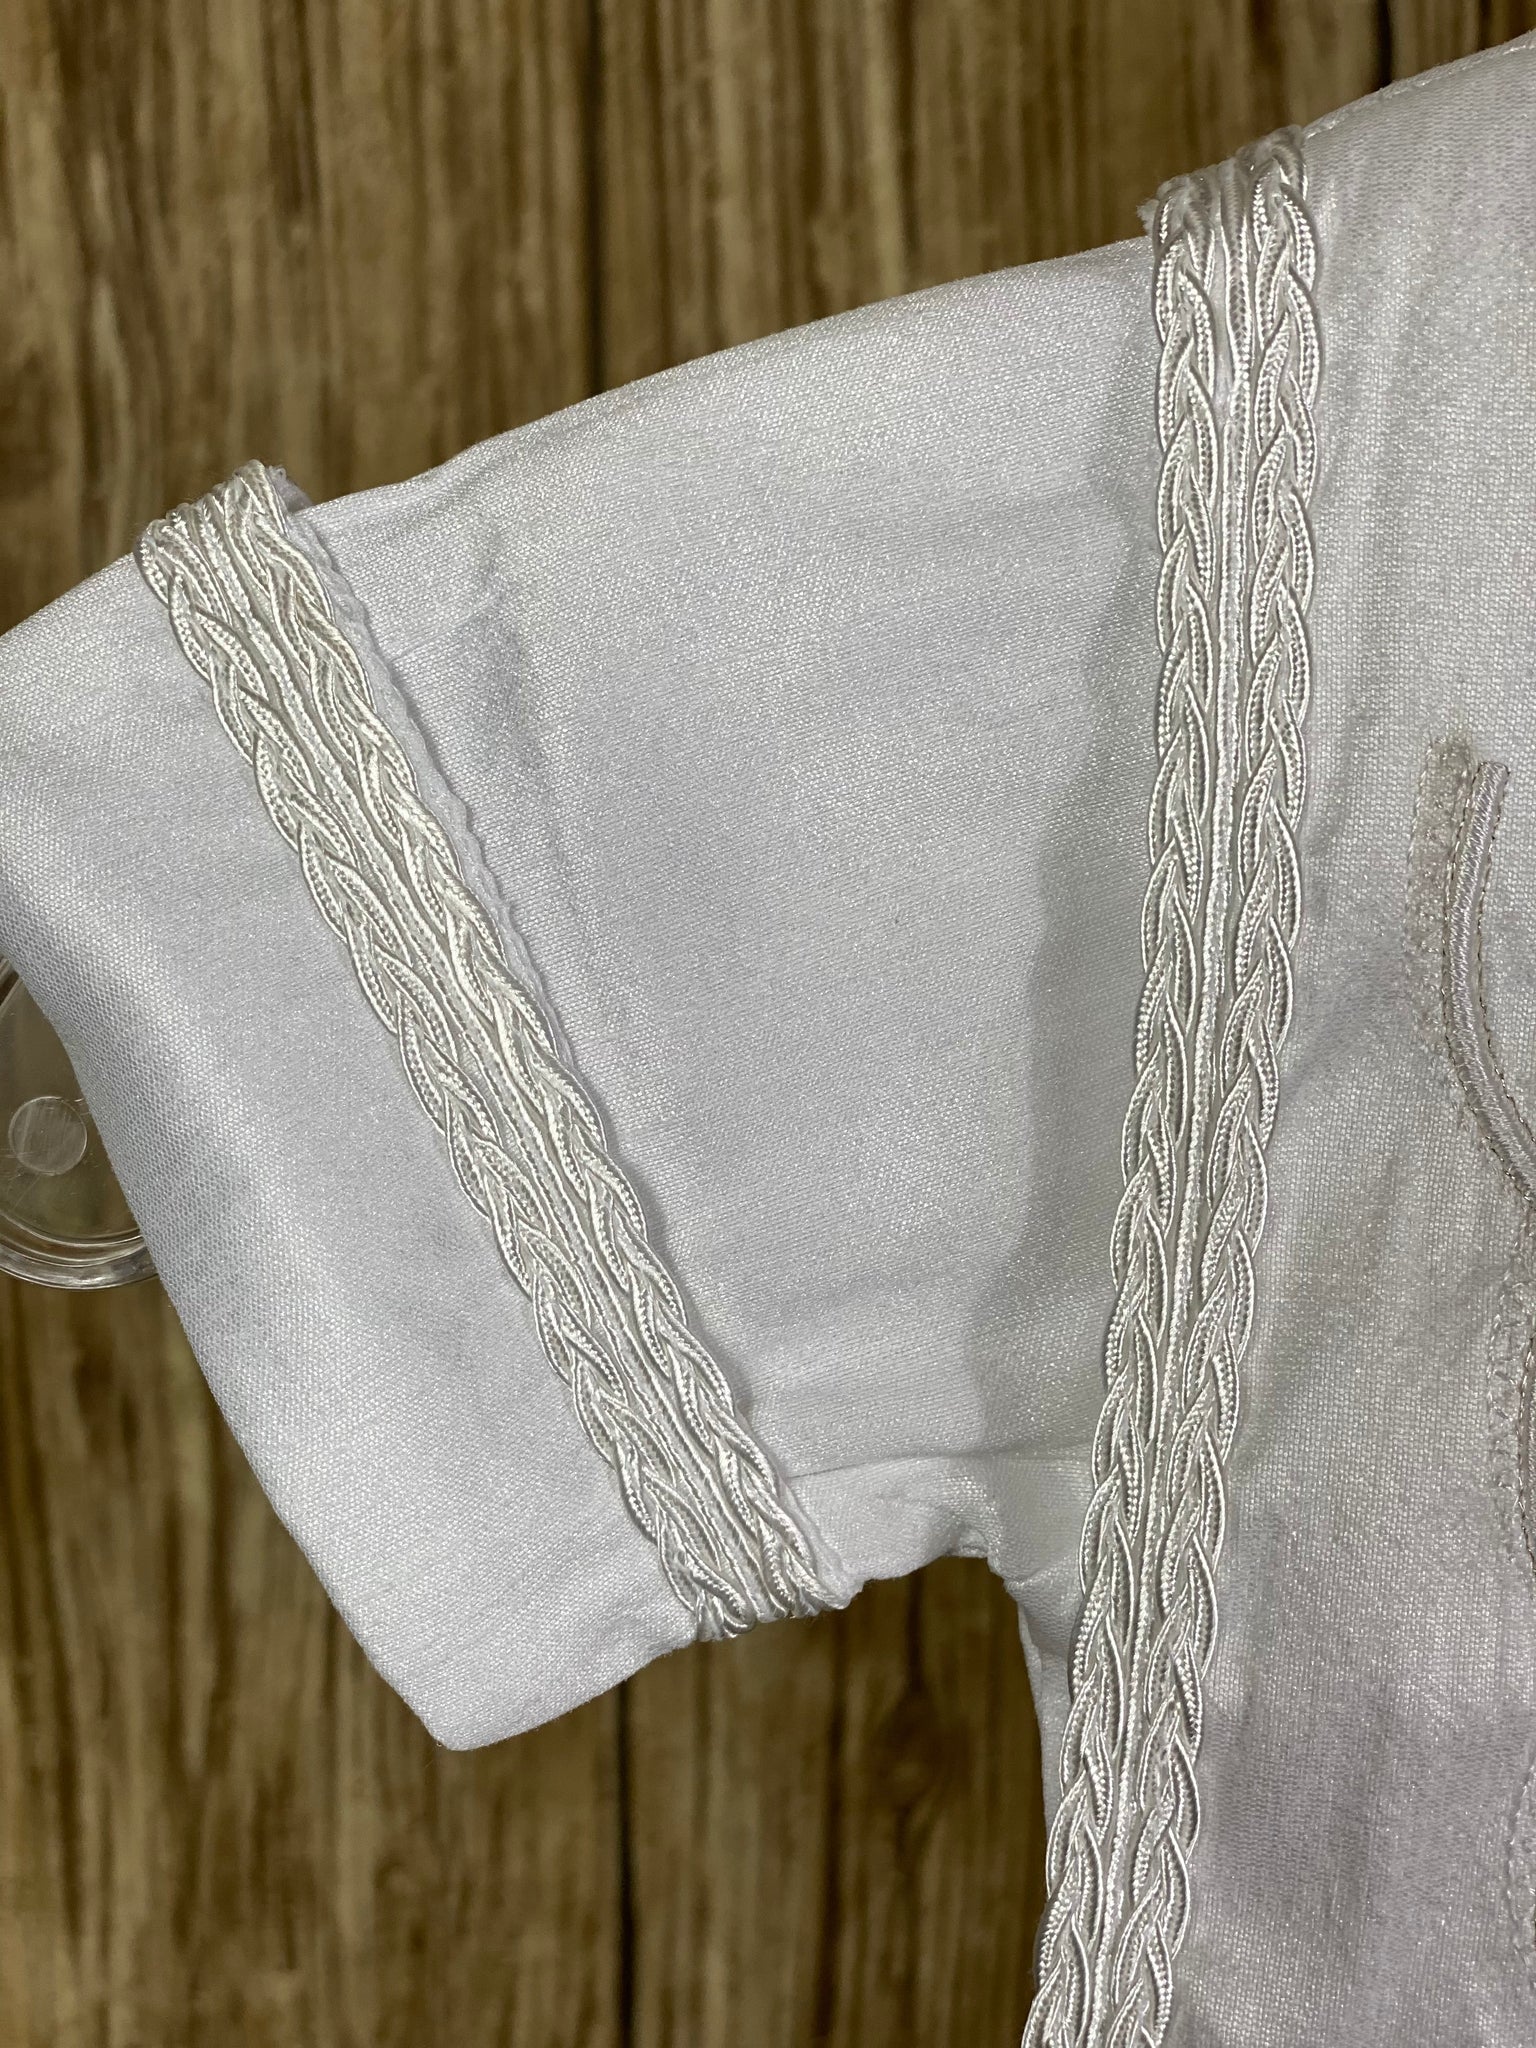 White, size 6M  4-piece set including shirt, pants, stole, beret Collared shirt with short sleeves Embroidered intricate design on stole, trimmed with braided ribbon around edge Ribbon closure on stole Intricate braided trim around beret Braided trim design on cuffs and shirt bodice Buttoning on pant cuffs Elastic banding behind pants Button closure on back of shirt